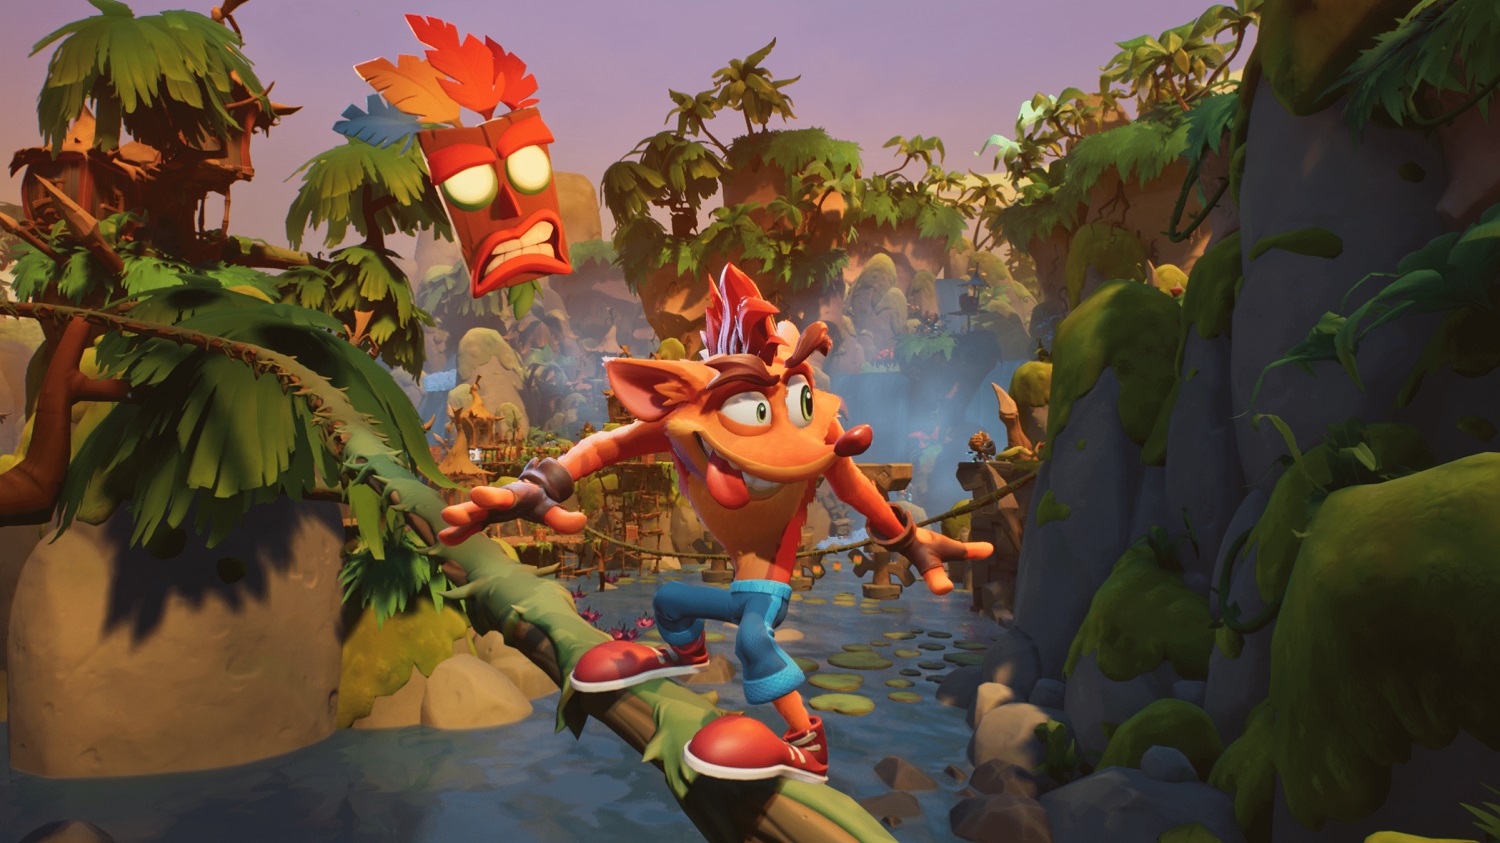 Forget God of War: Crash Bandicoot Is the PS5 Exclusive Sony Must